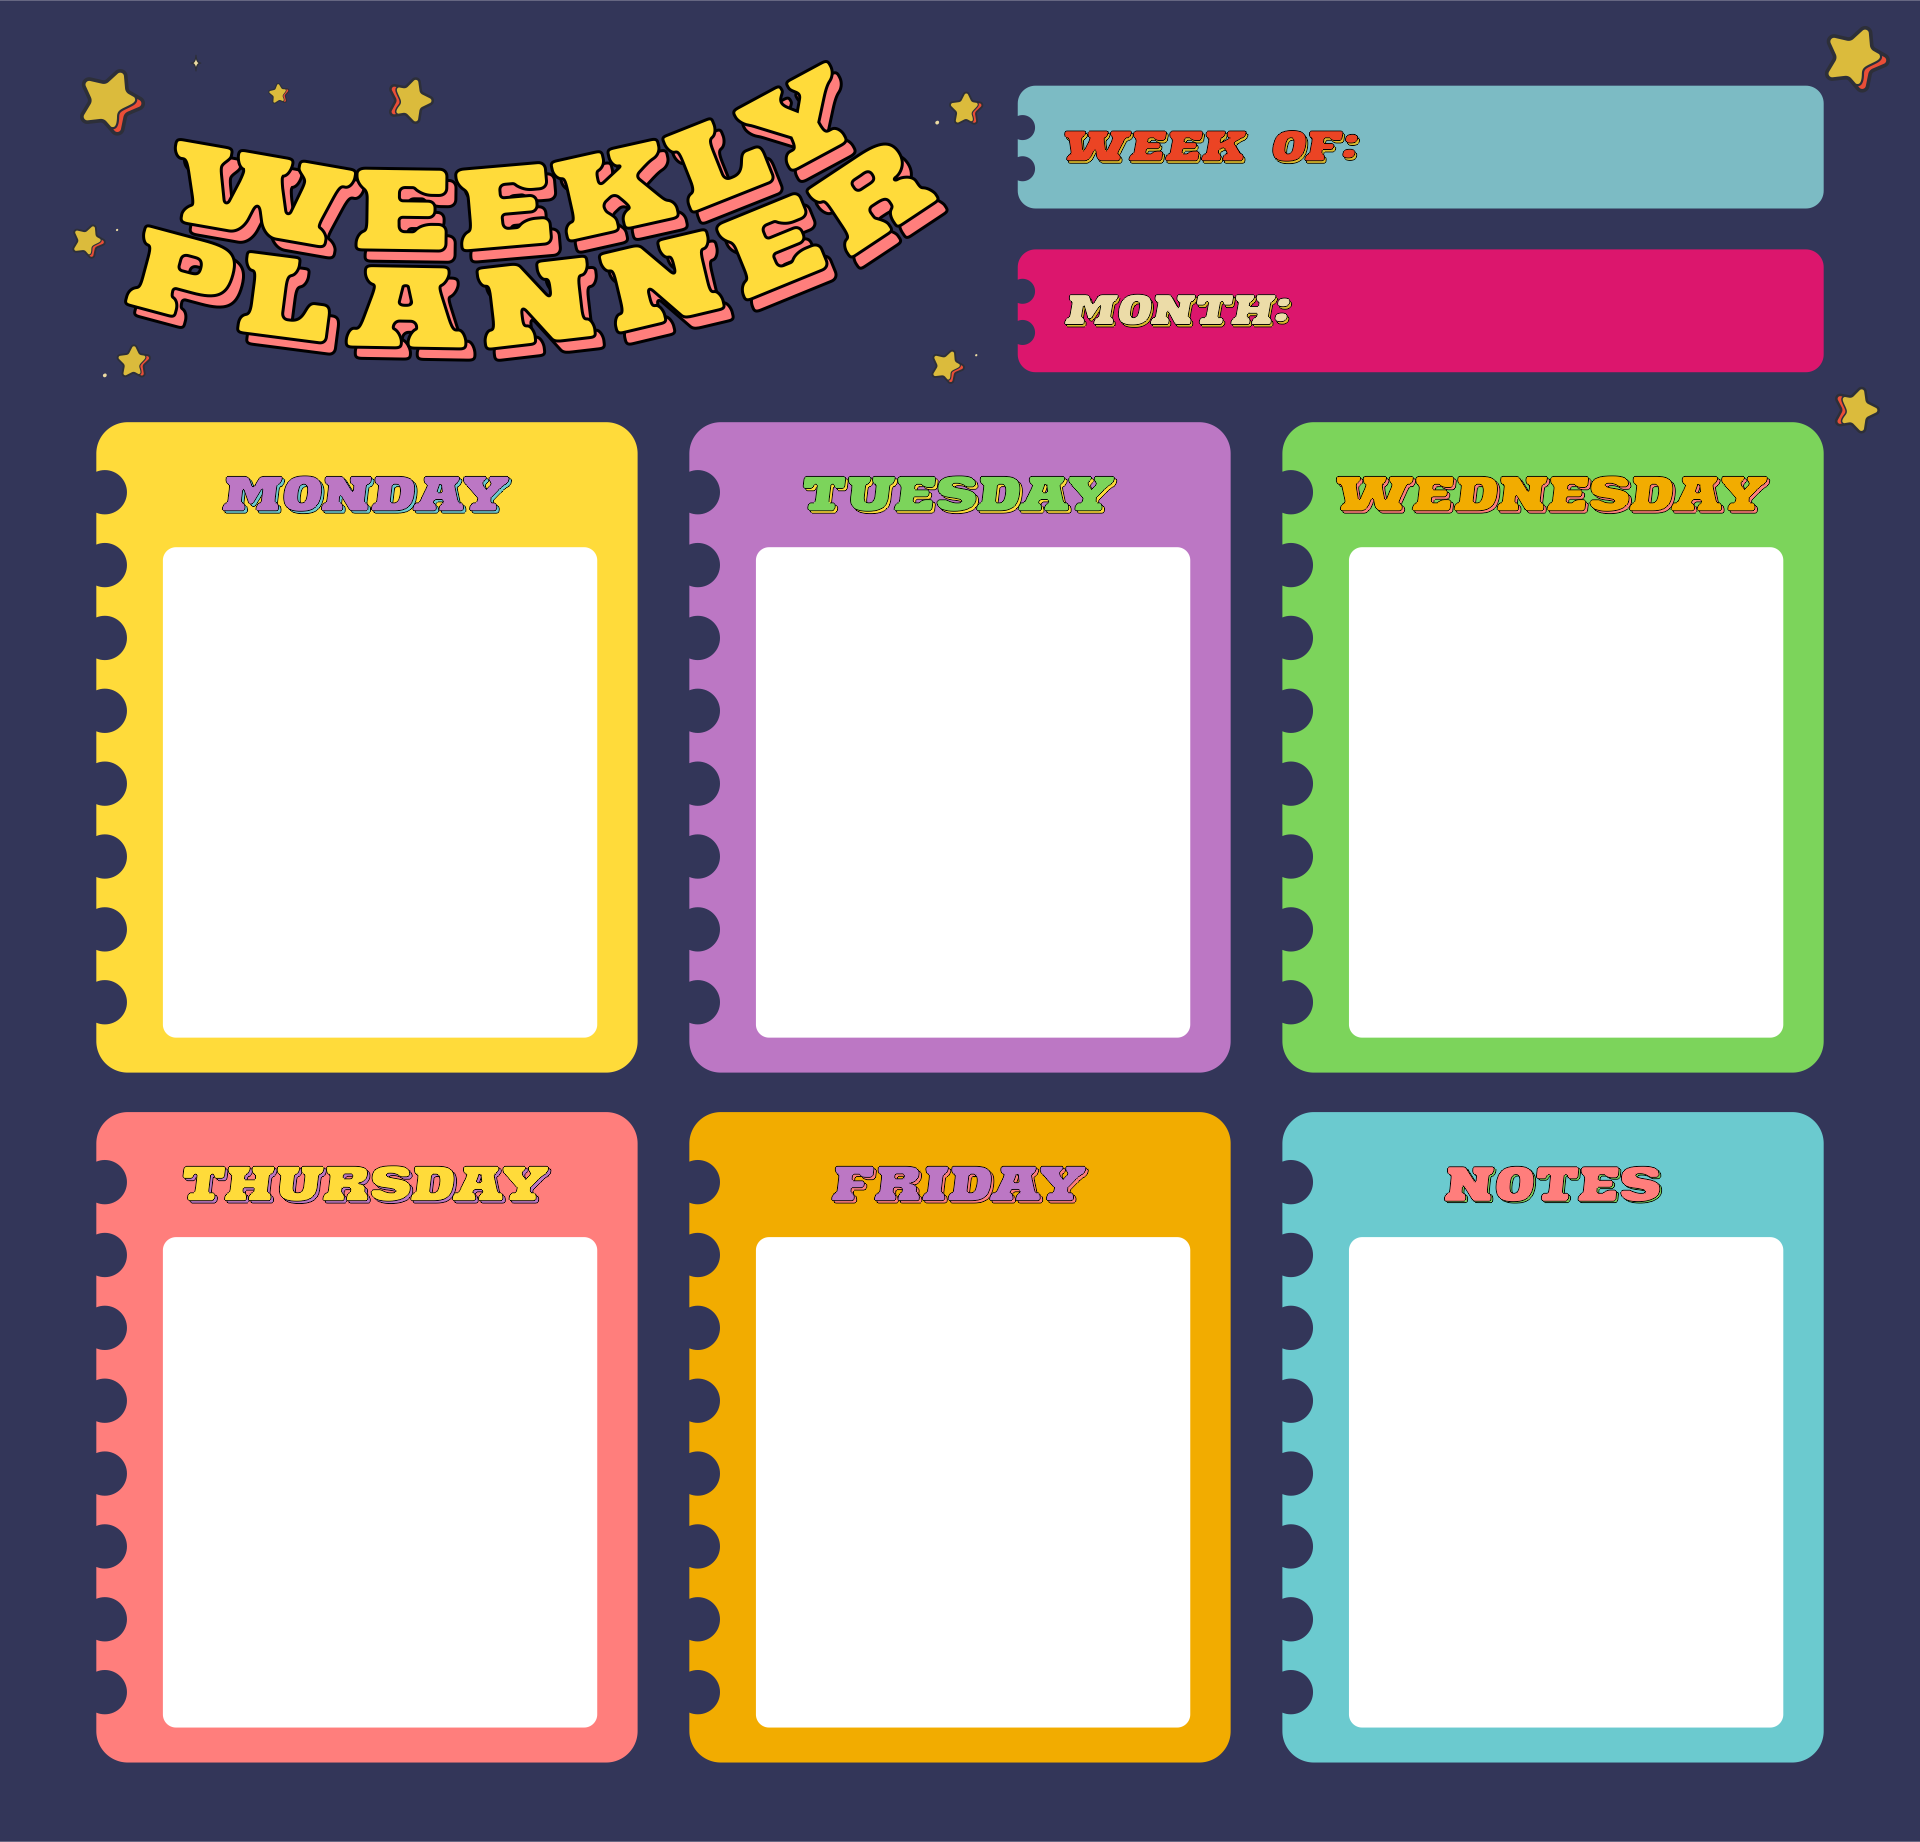 9 Best Images of Monday Through Friday Planner Printable Printable